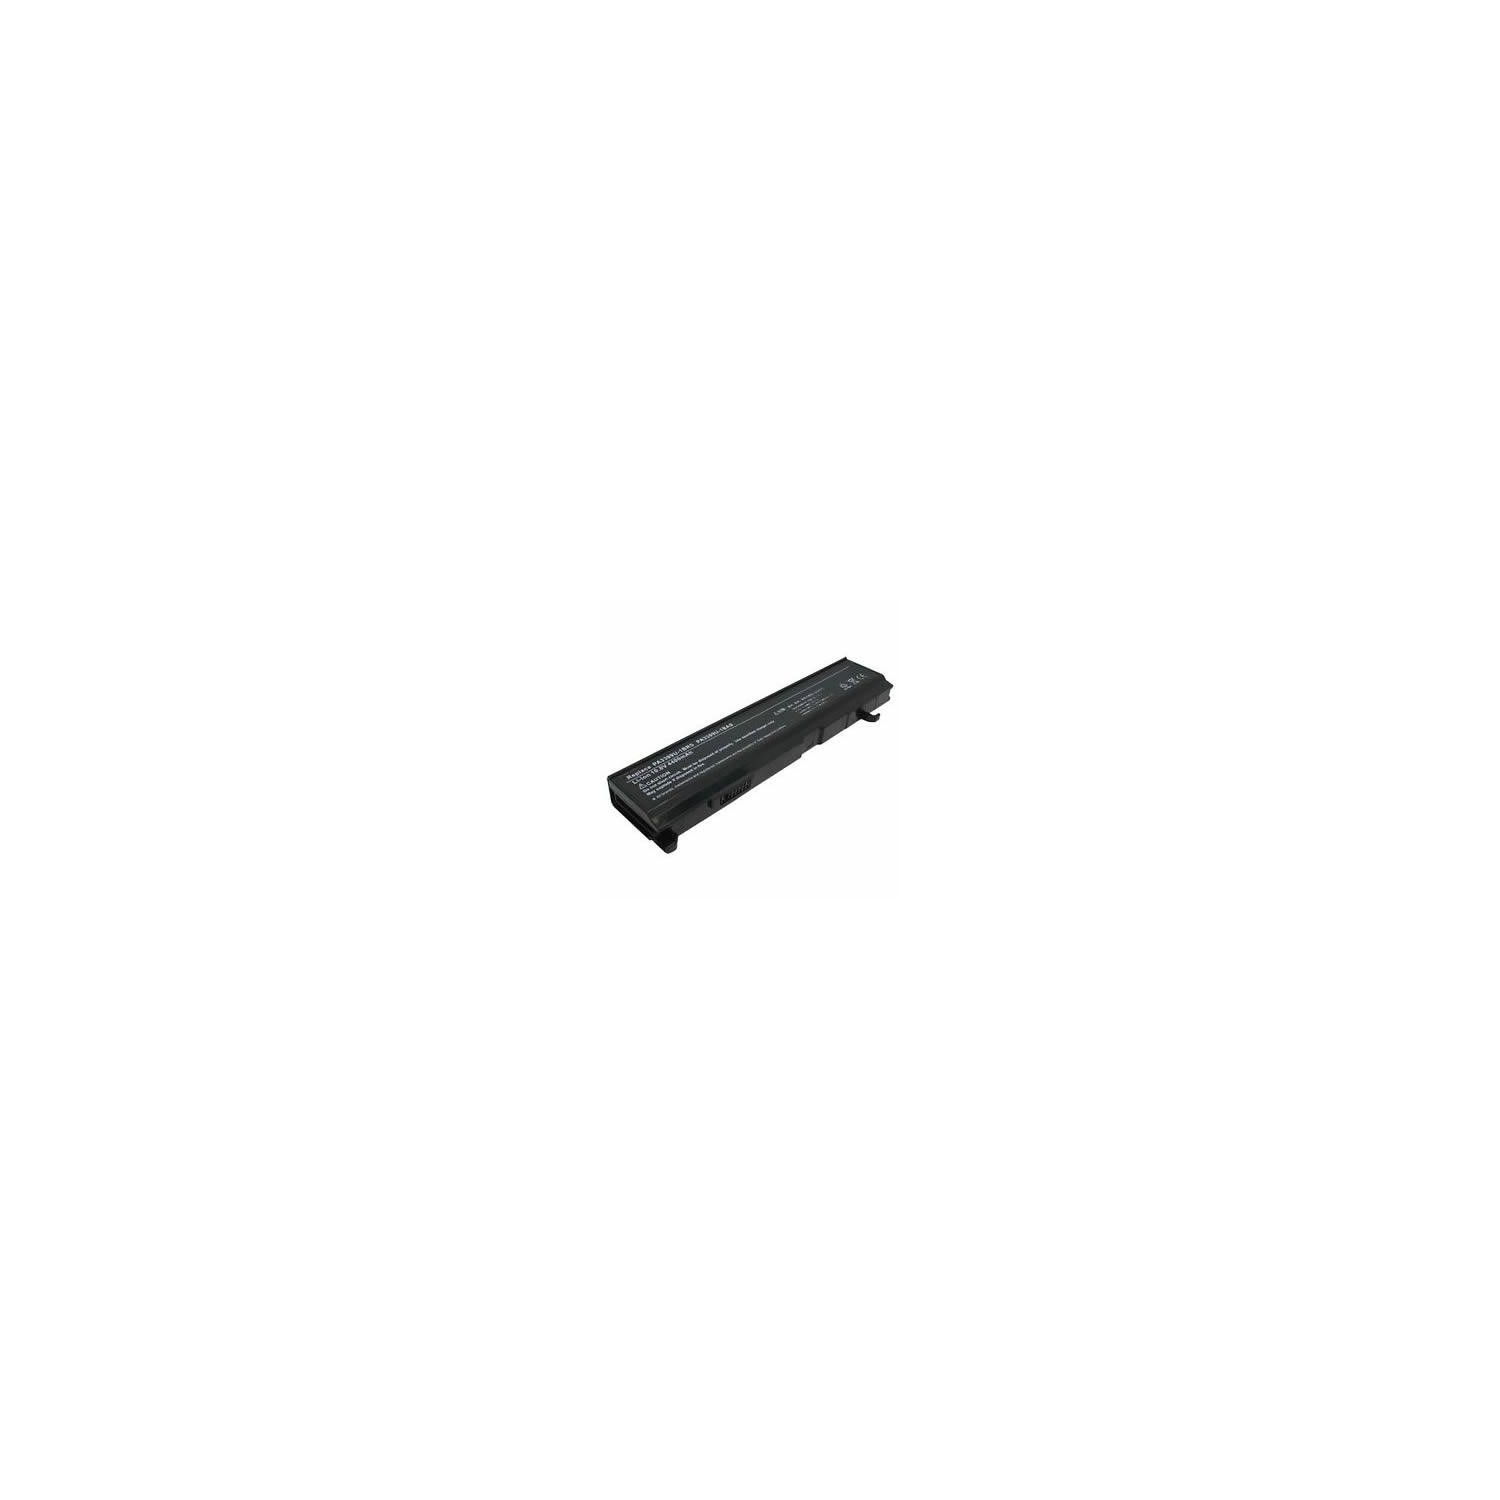 eGALAXY® LTS049 Battery for Toshiba Satellite A100-165 A100-169 A100-188 M115-S3094 PA3399U-2BRS